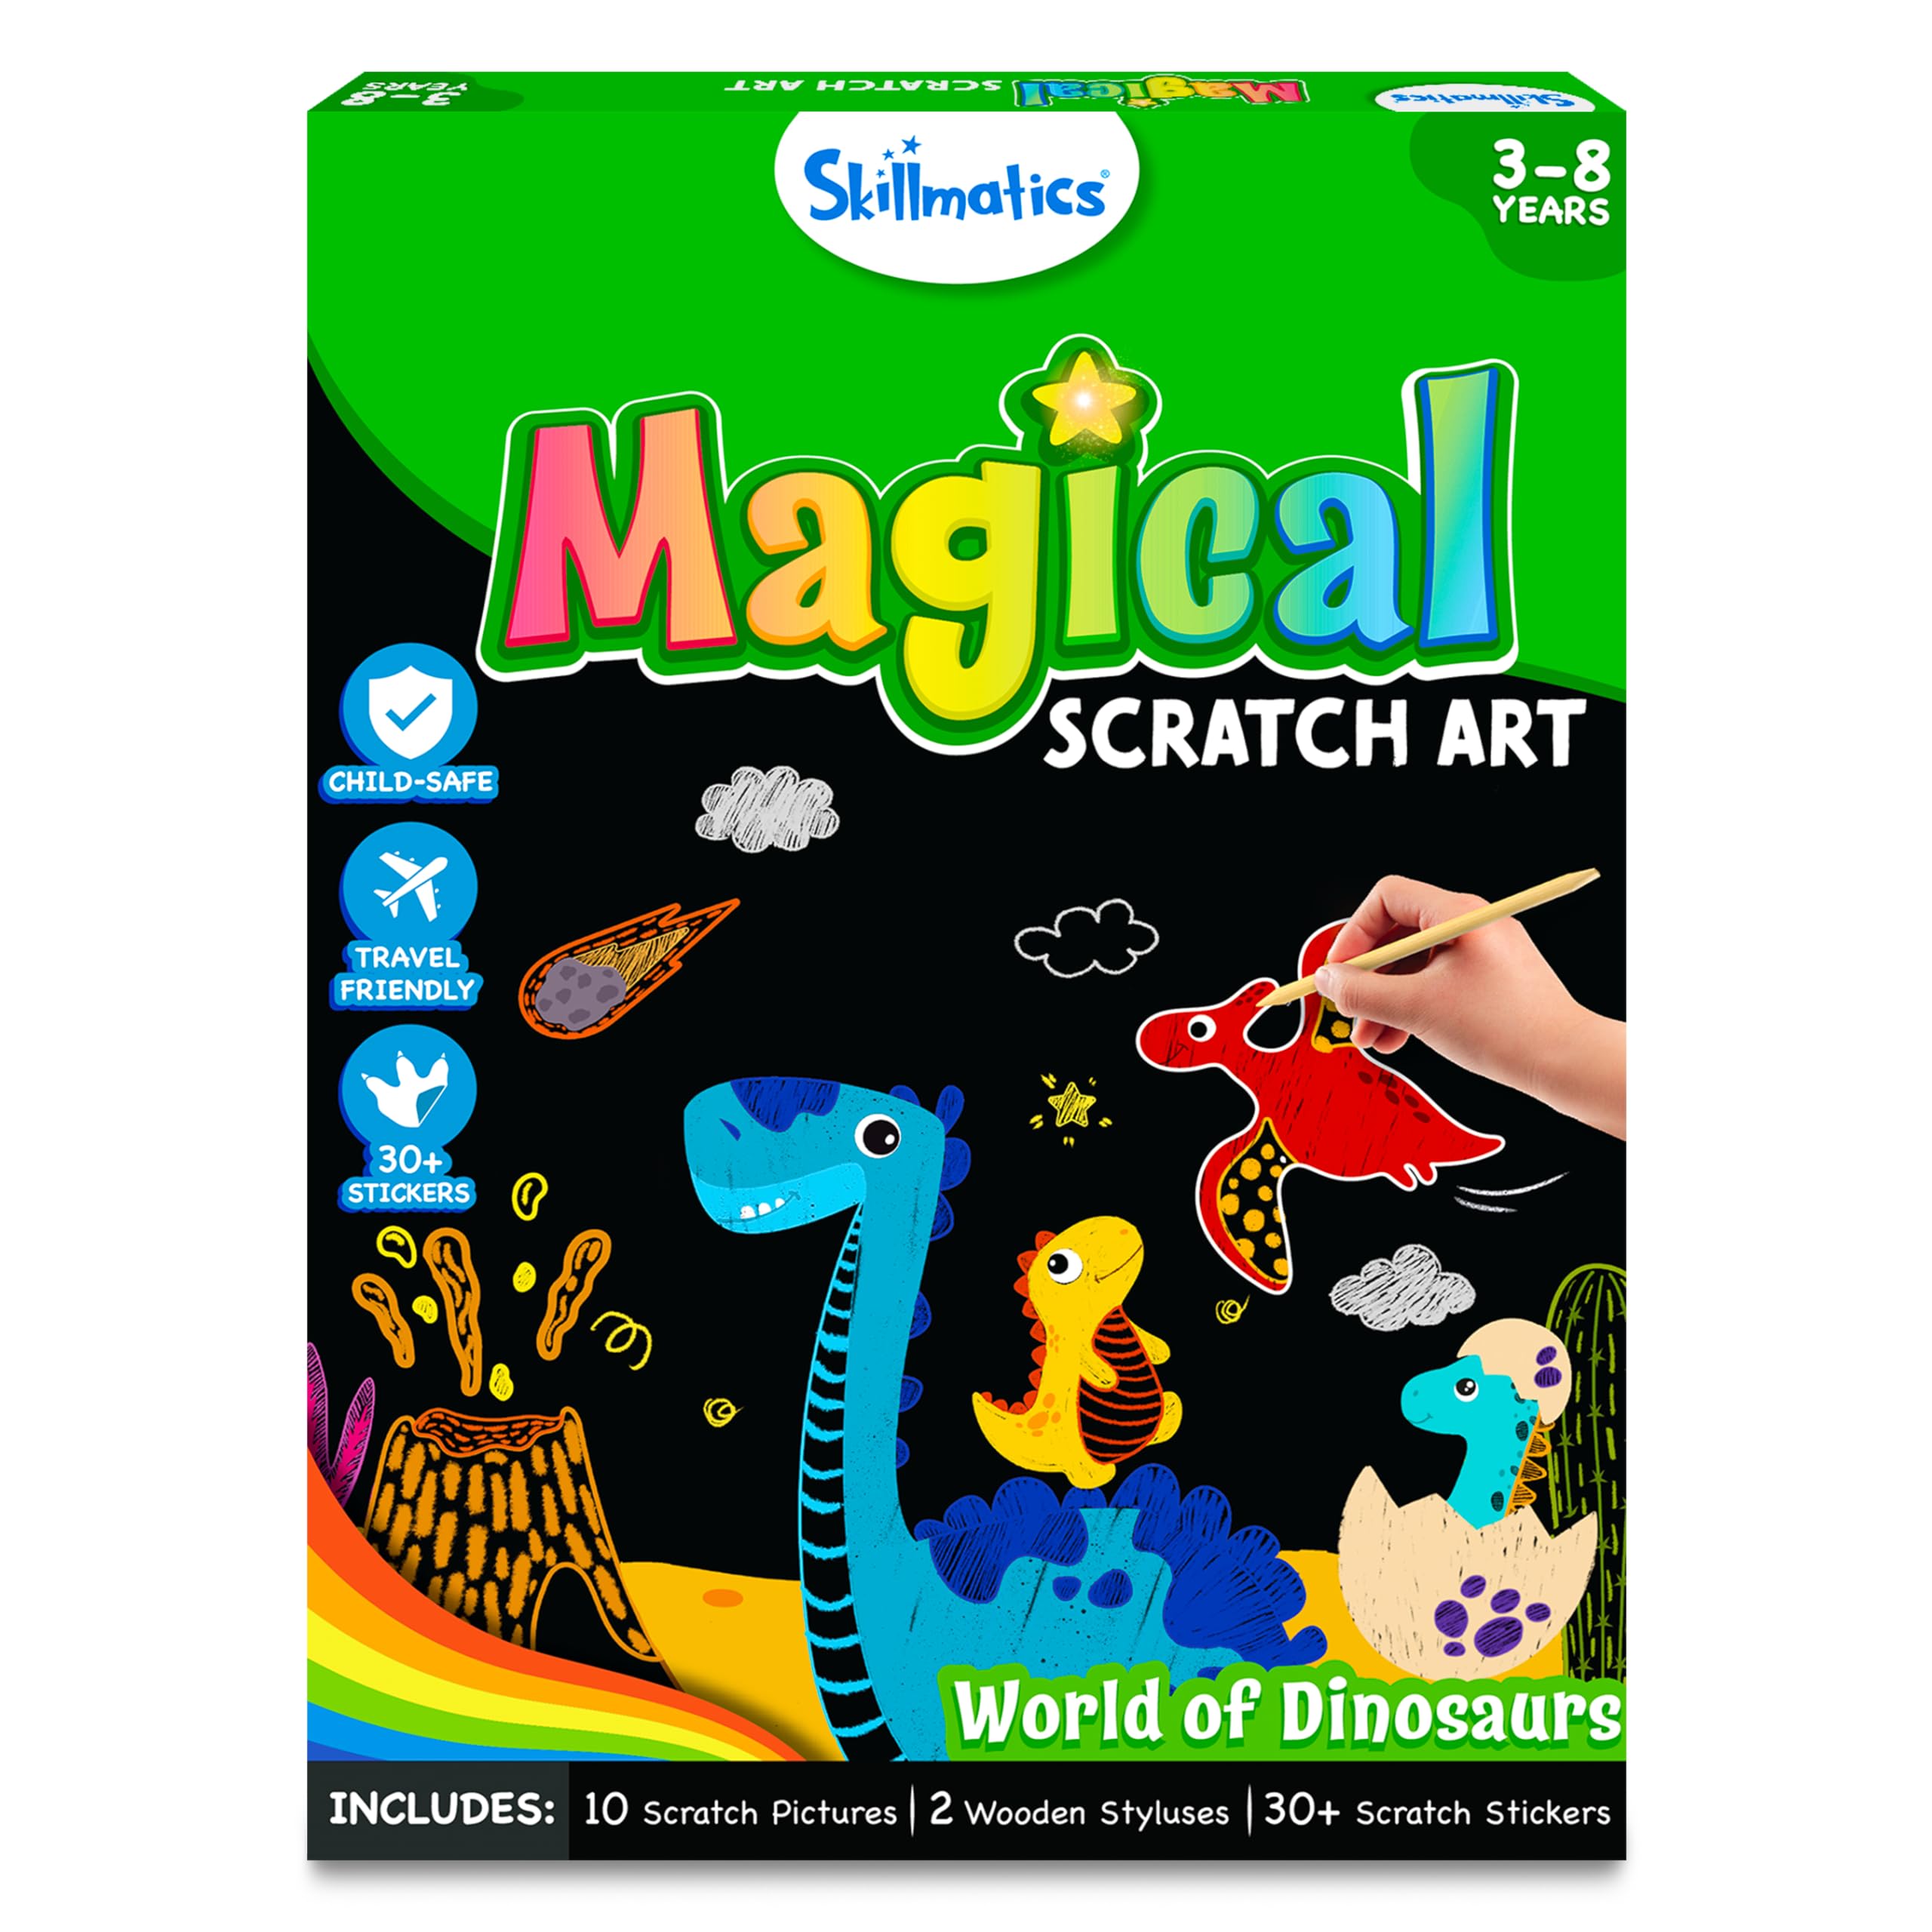 Skillmatics Magical Scratch Art Book Dinosaurs Theme & Fun with Foam with Underwater Animals Theme Bundle, Art & Craft Kits, DIY Activities for Kids